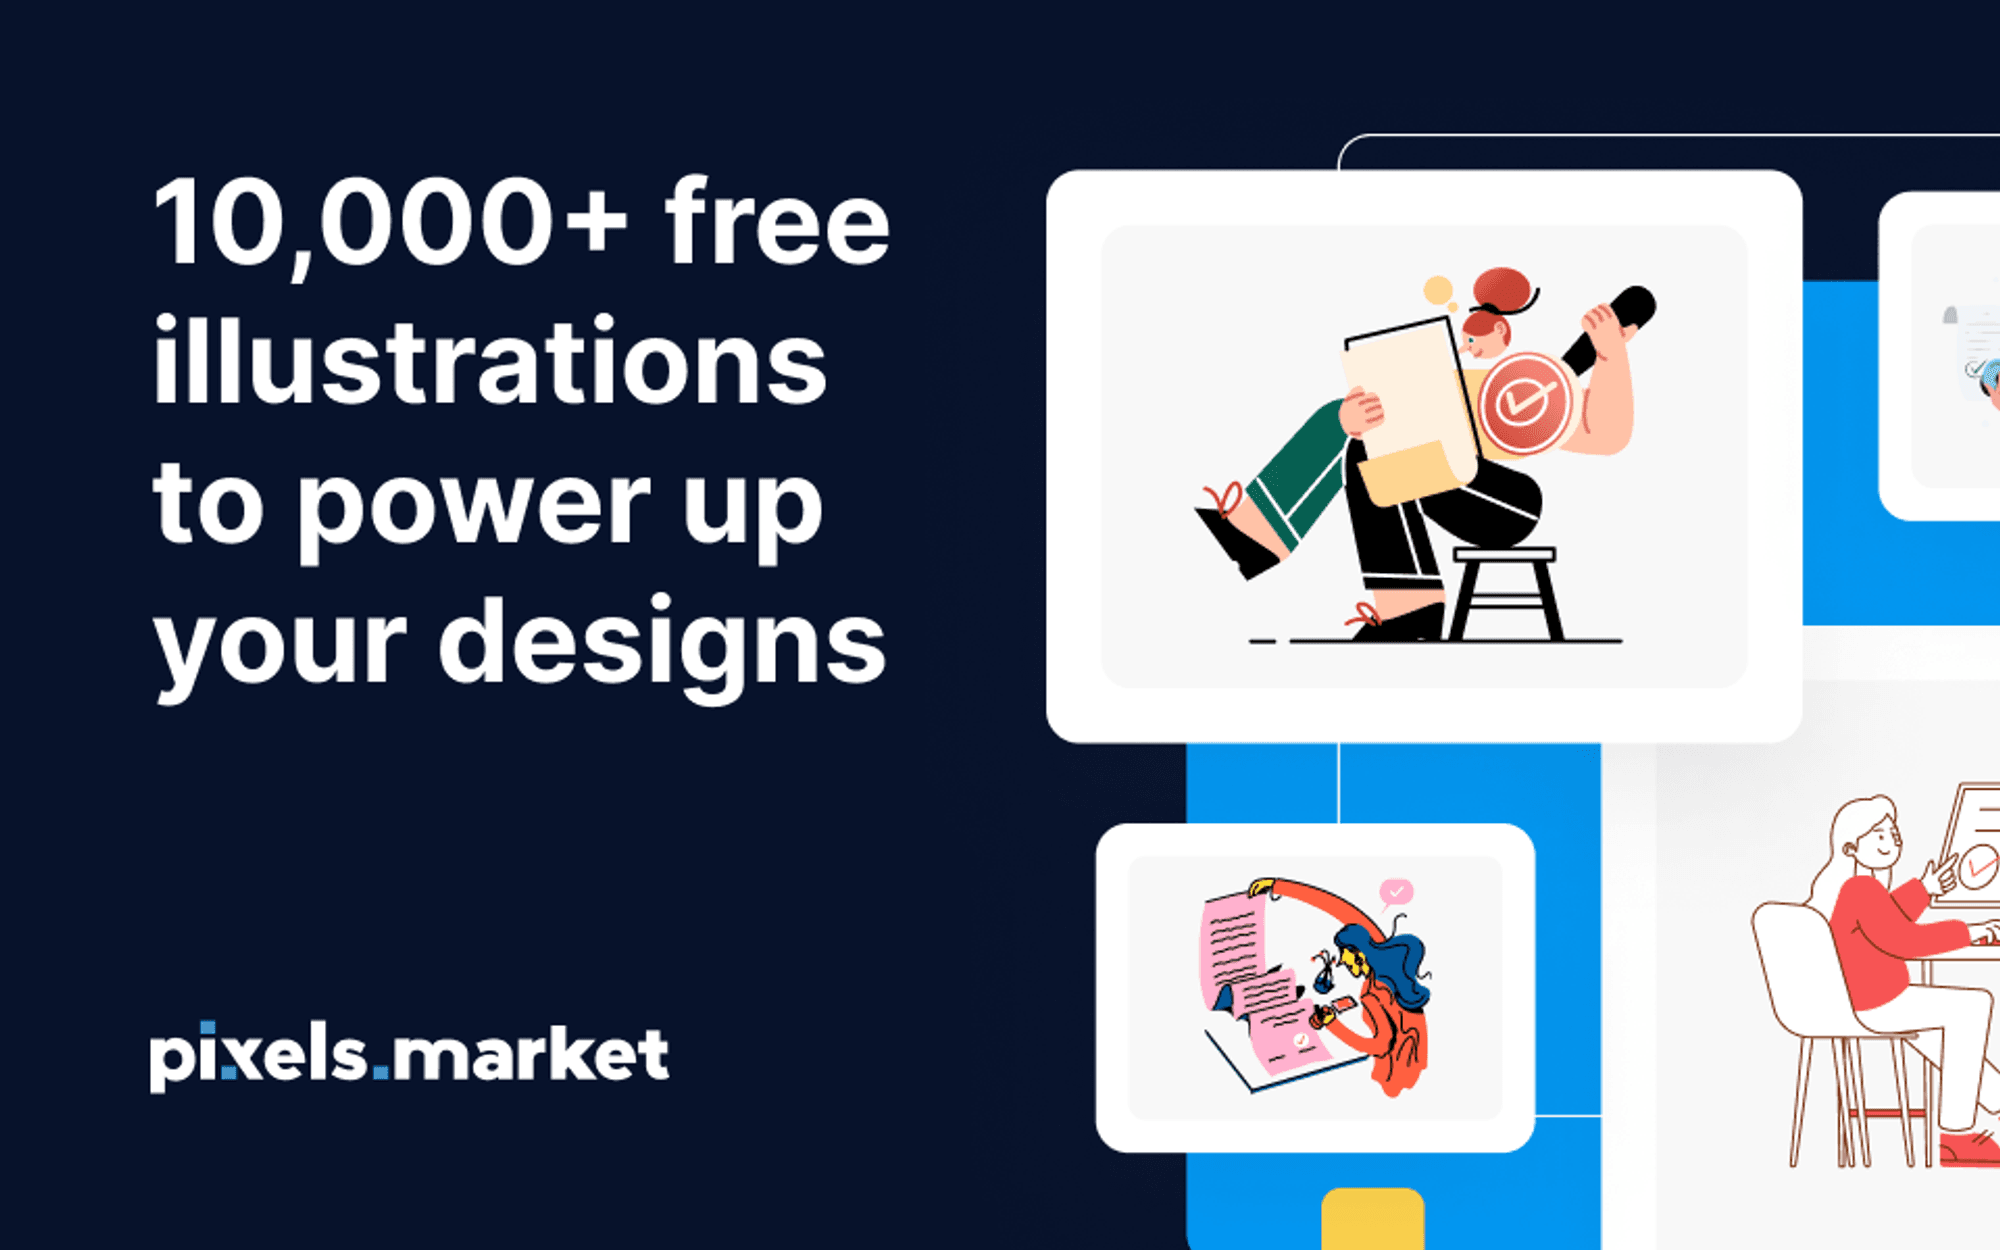 Download 10,000+ free illustrations to power up your designs